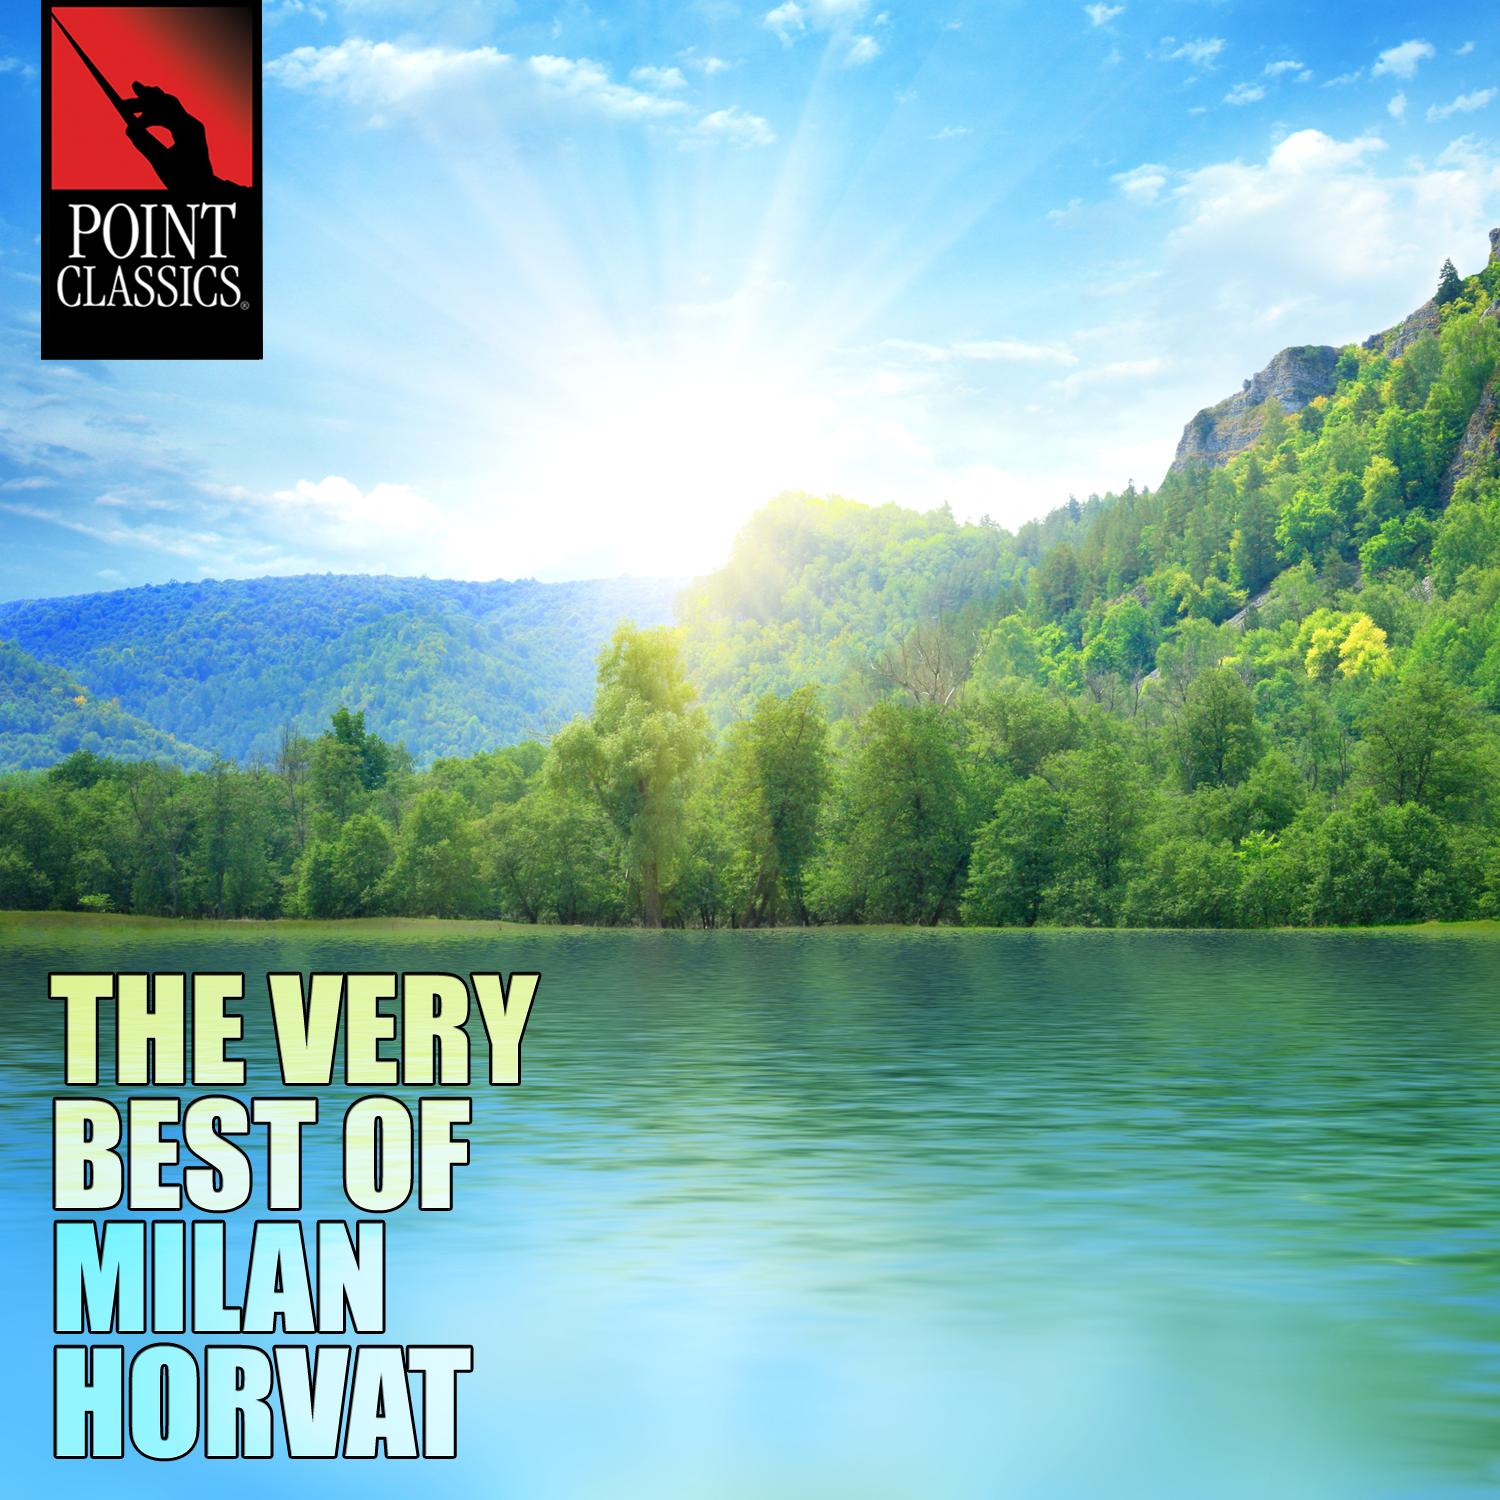 The Very Best of Milan Horvat - 50 Tracks